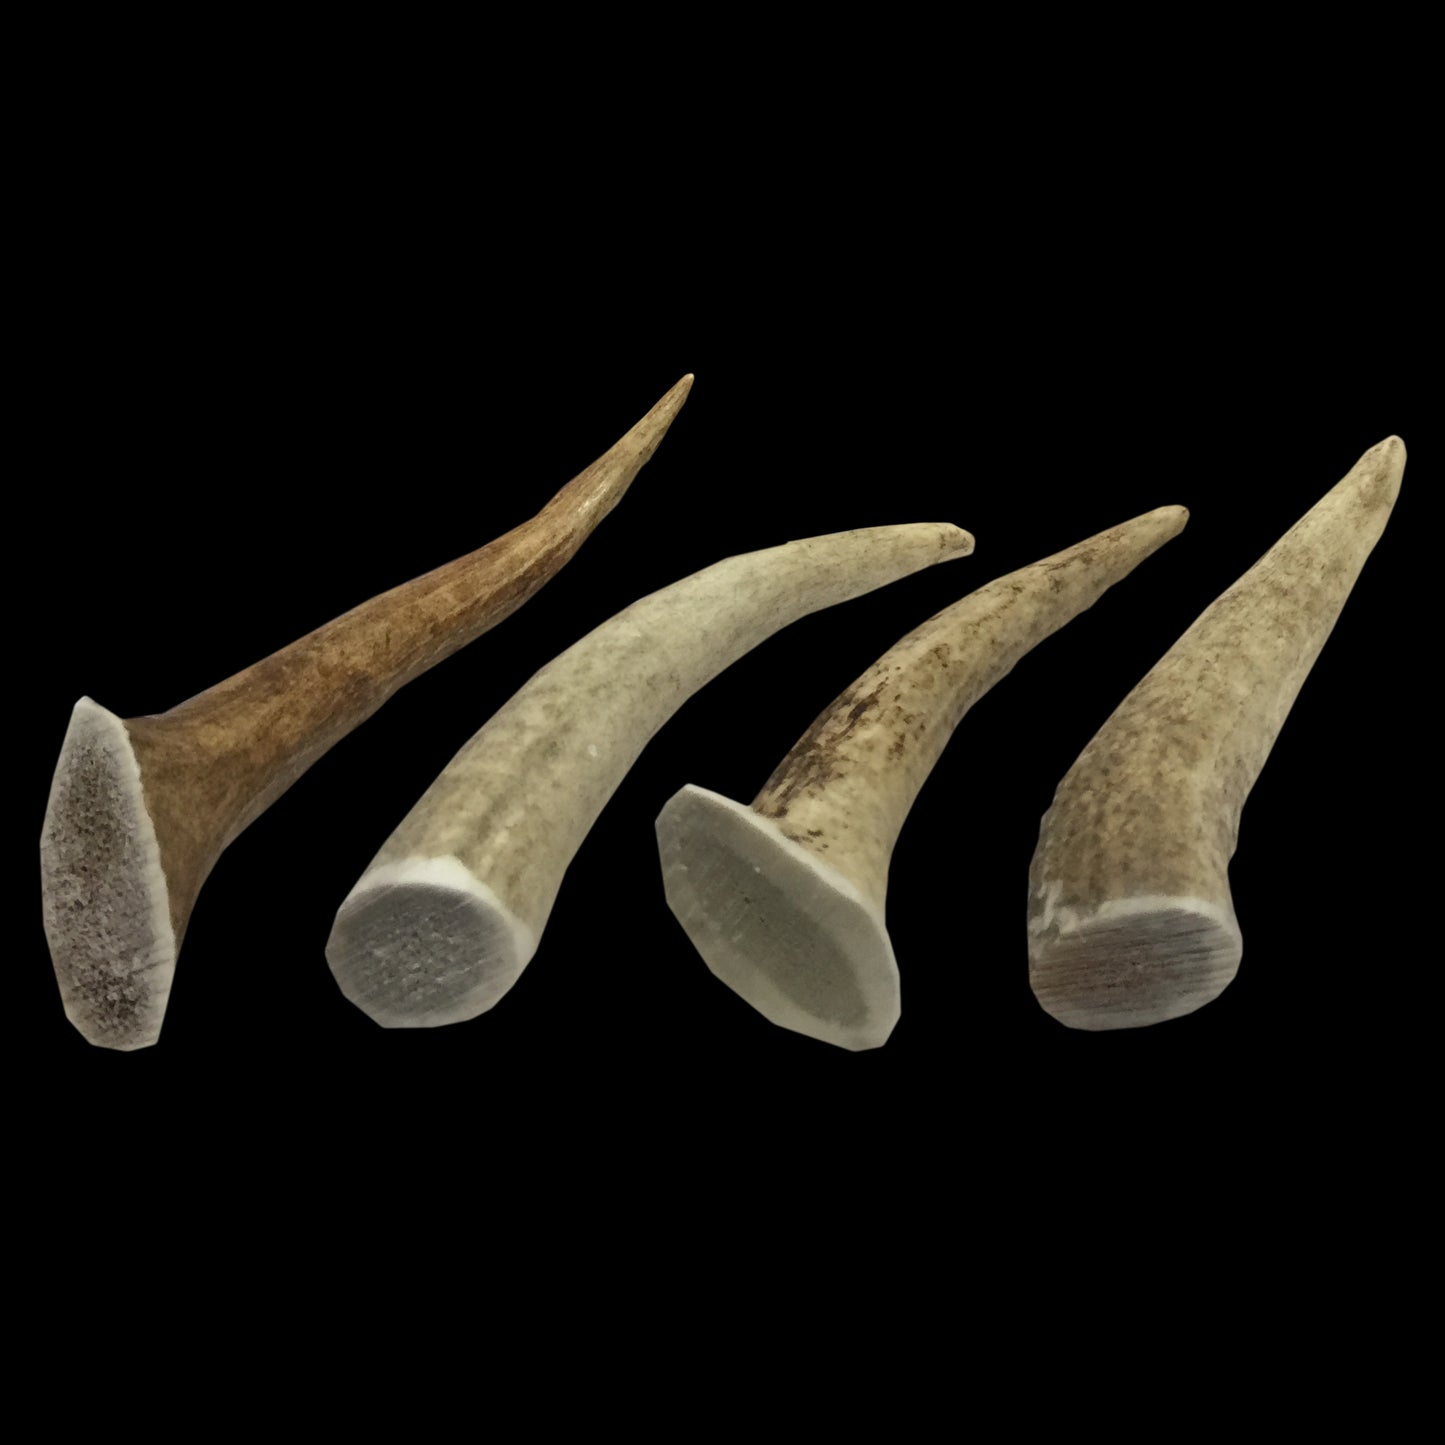 Deluxe Naturals 4-Pack Elk Antler Dog Chew - Small Whole